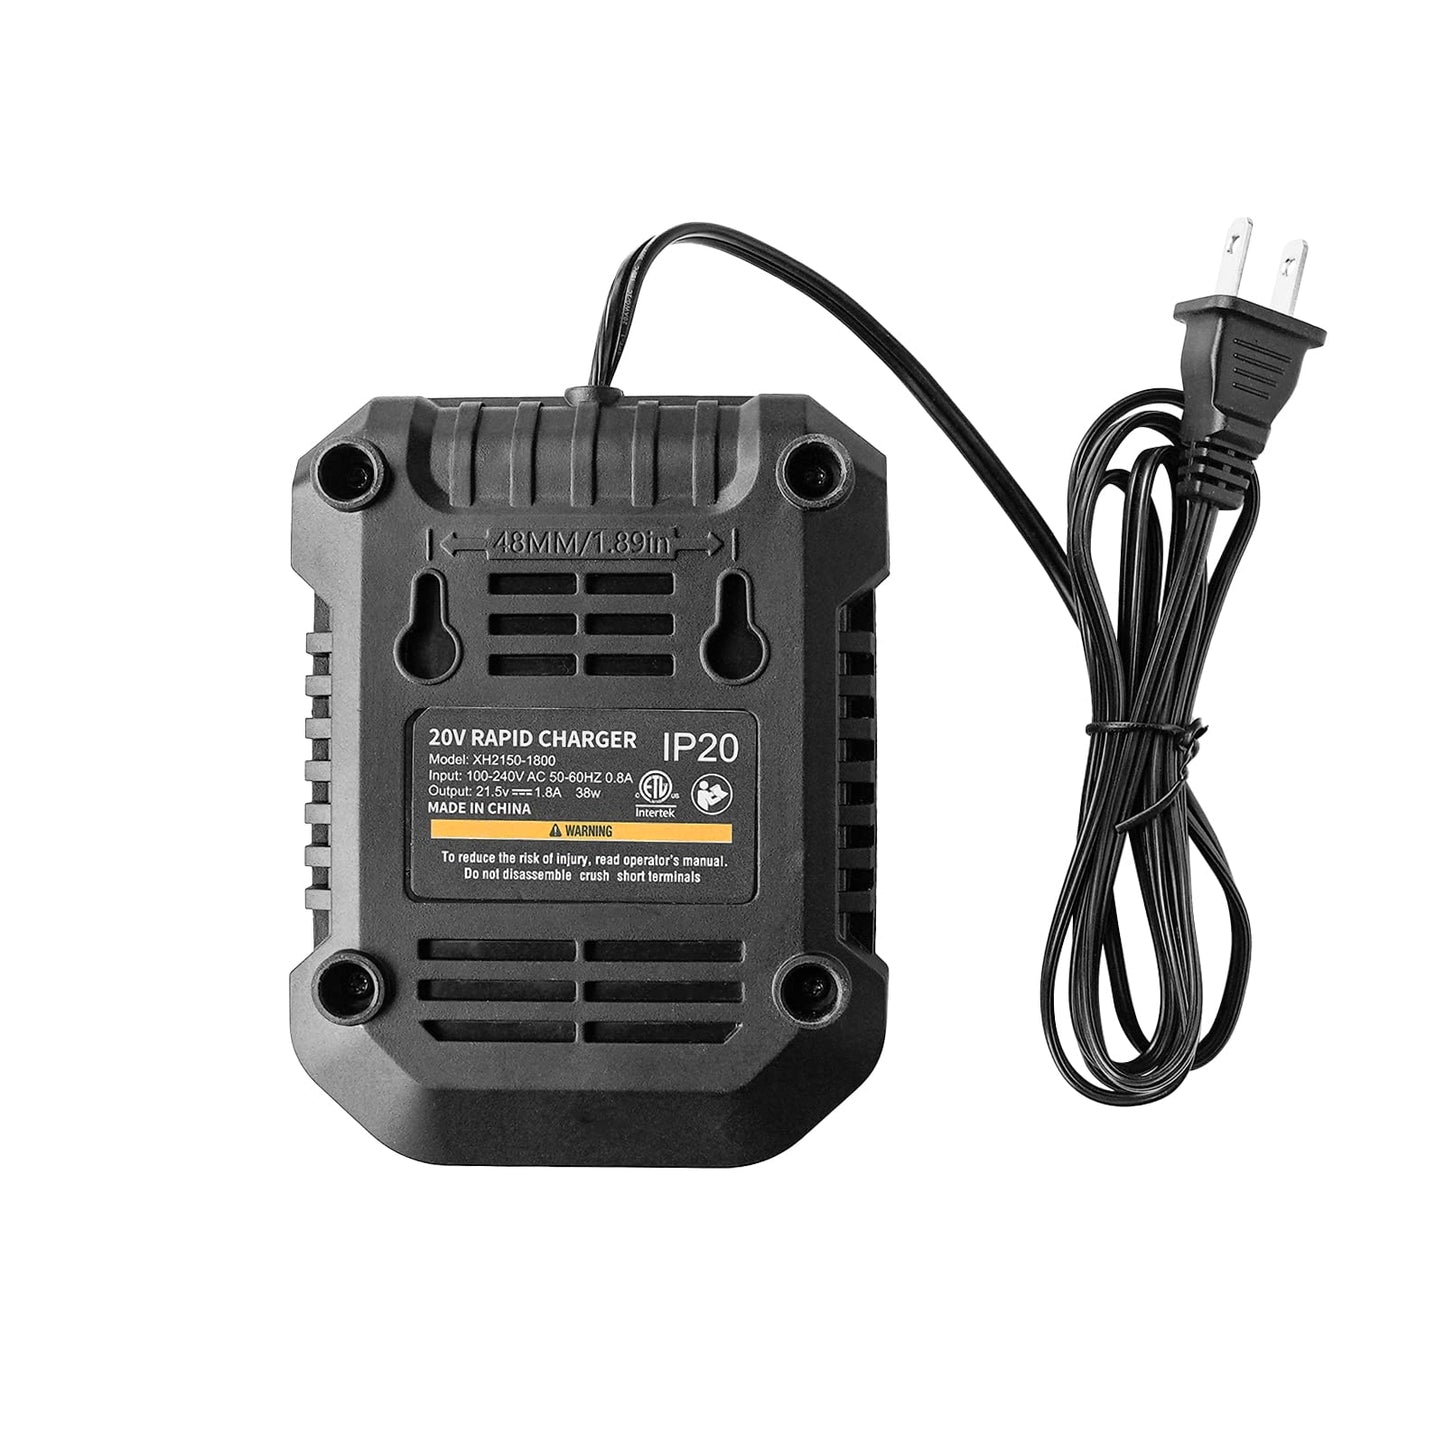 SEYVUM 1.8A Fast Charger,Replacement Charger for LB-8189 and LB-8190 Leaf Blower